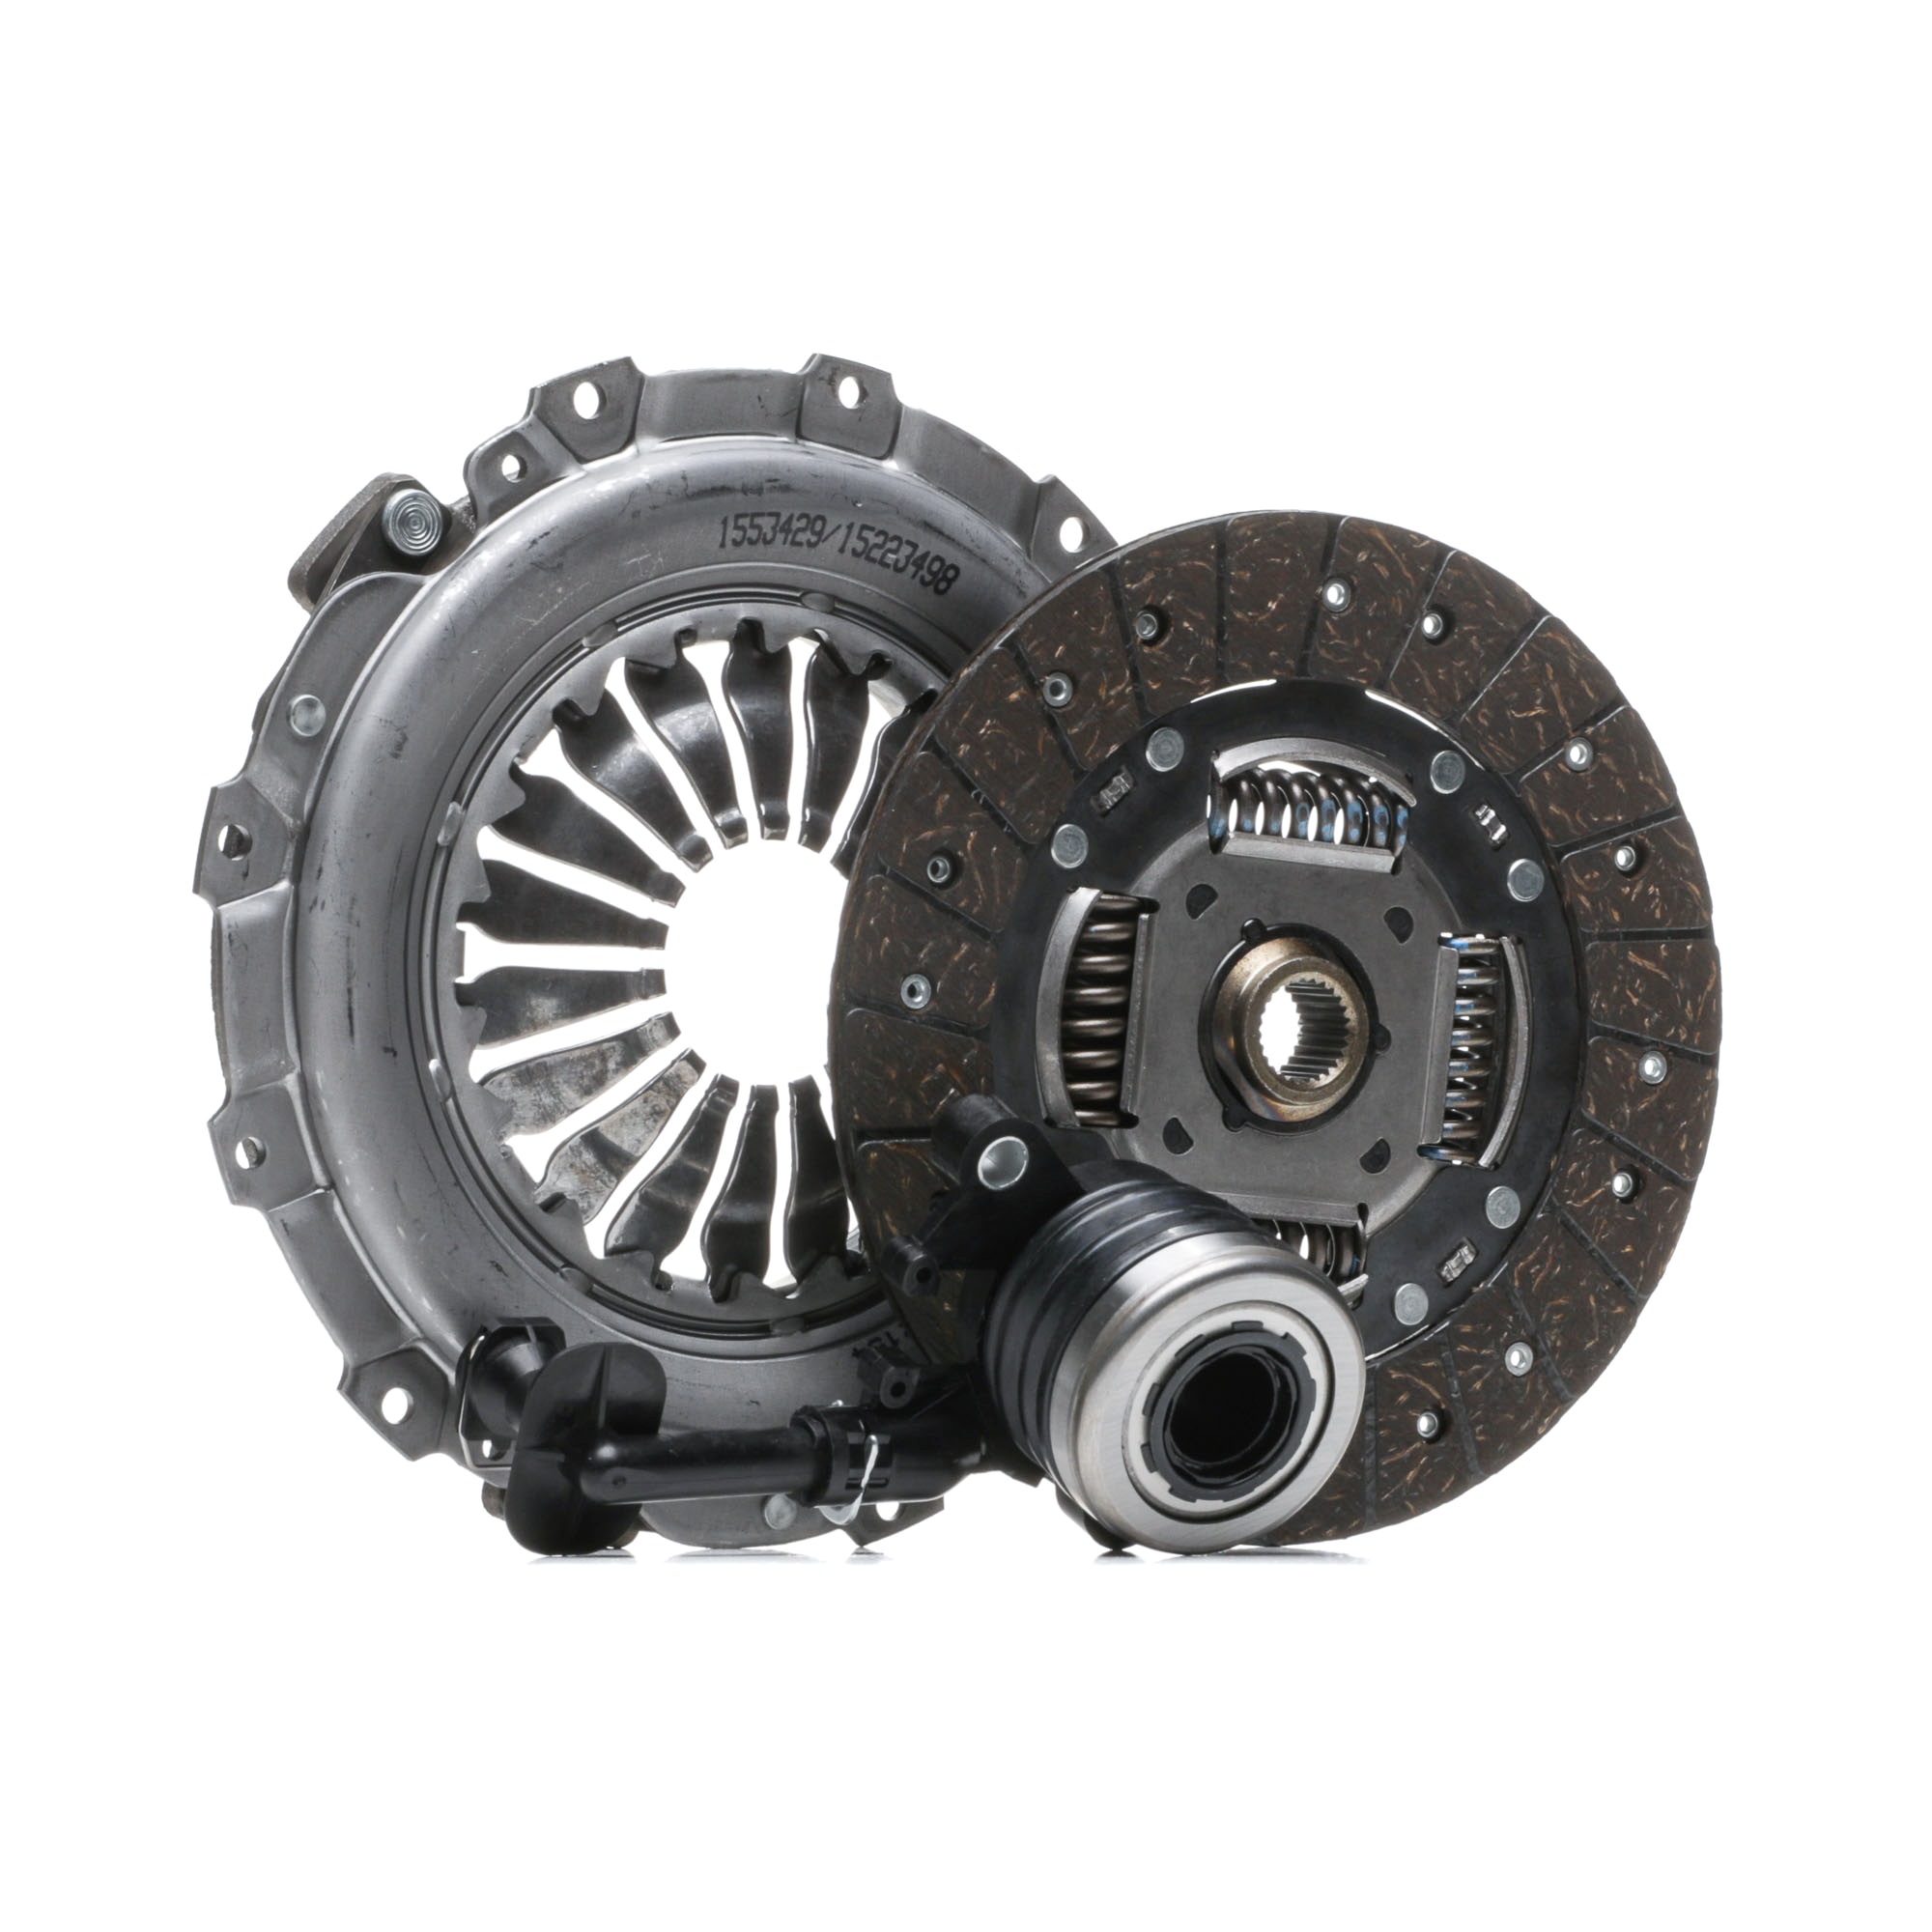 RIDEX 479C0417 Clutch kit with clutch pressure plate, with central slave cylinder, with clutch disc, 220mm